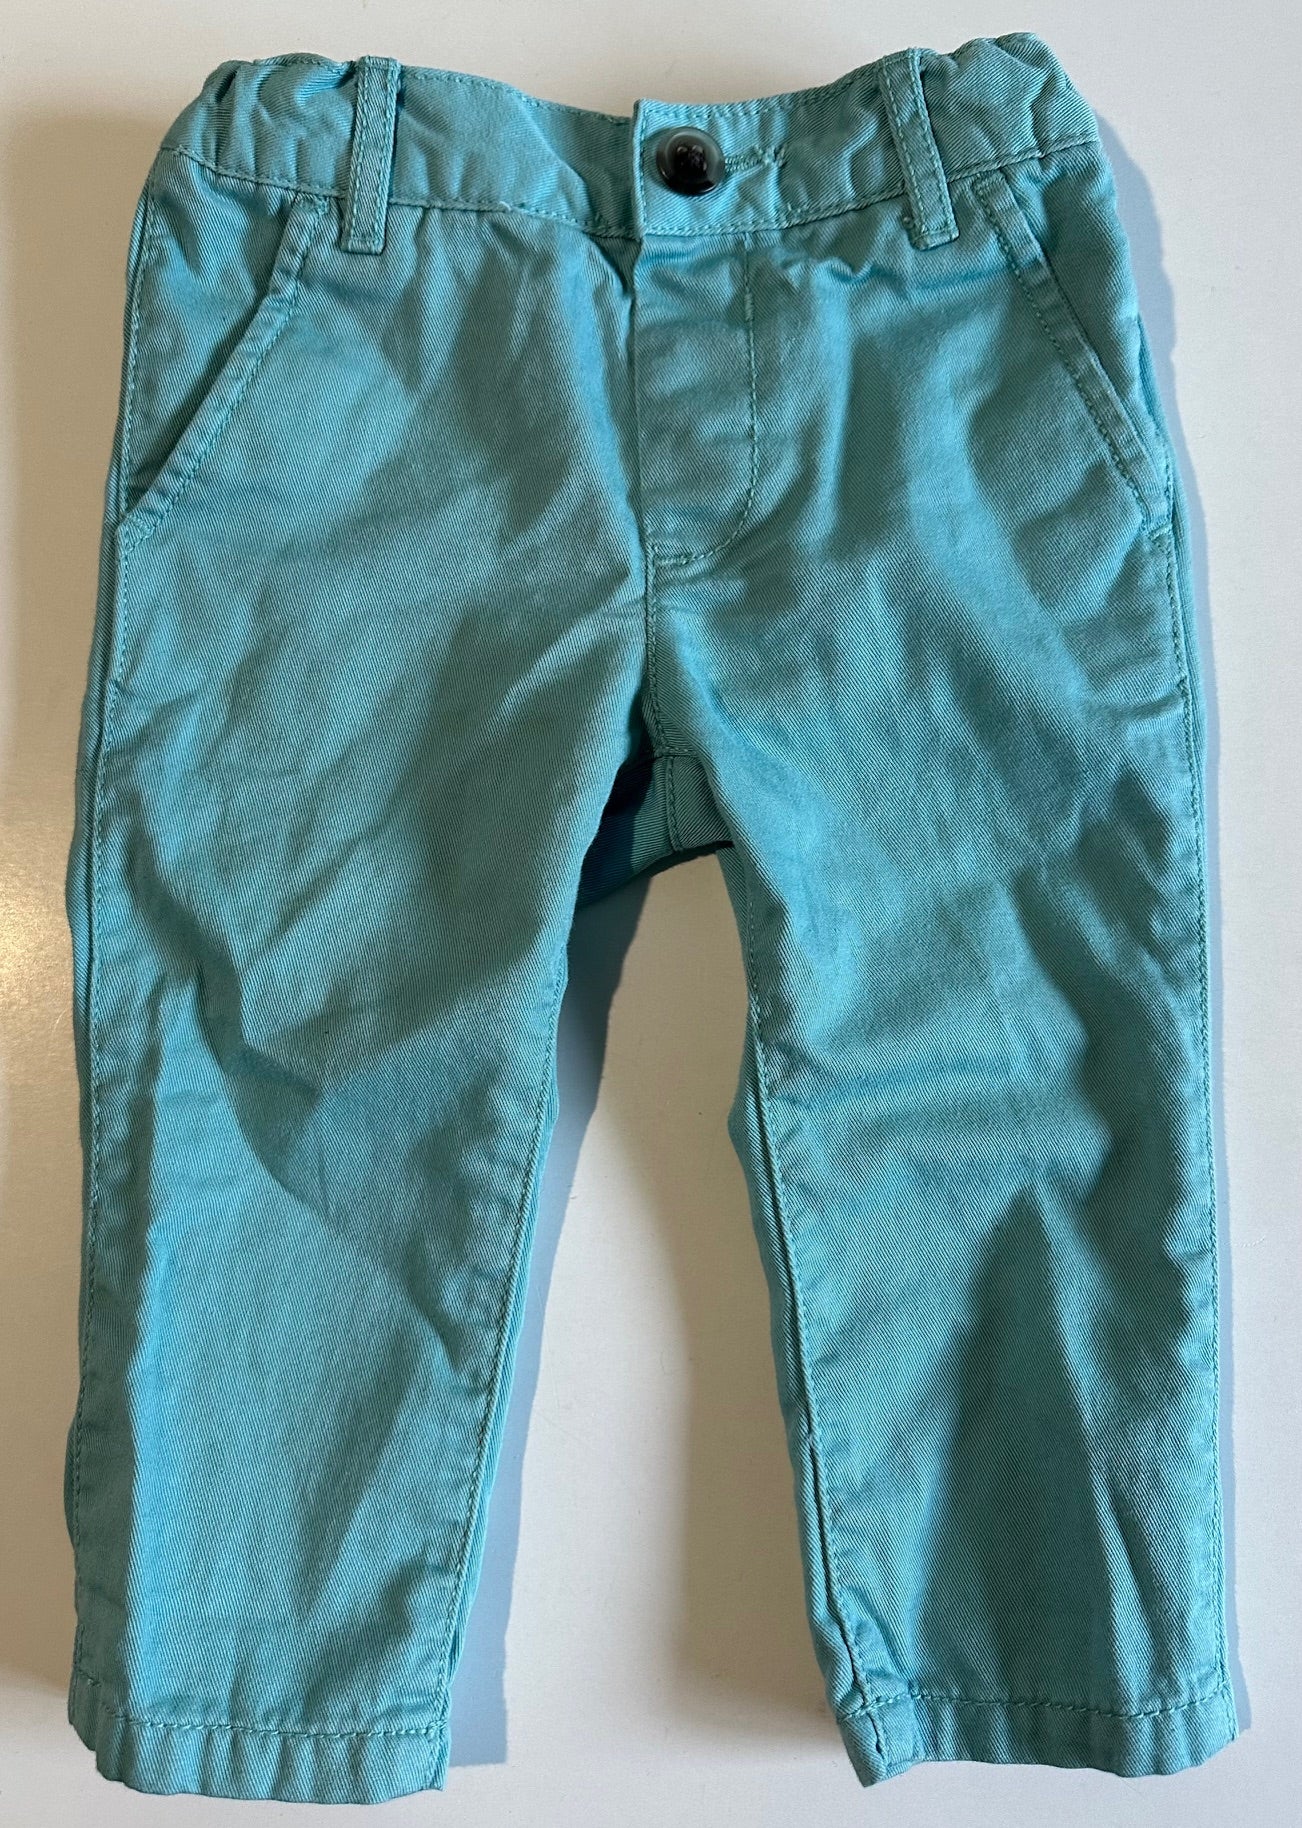 Children's Place, Blue Chino Pants - 12-18 Months